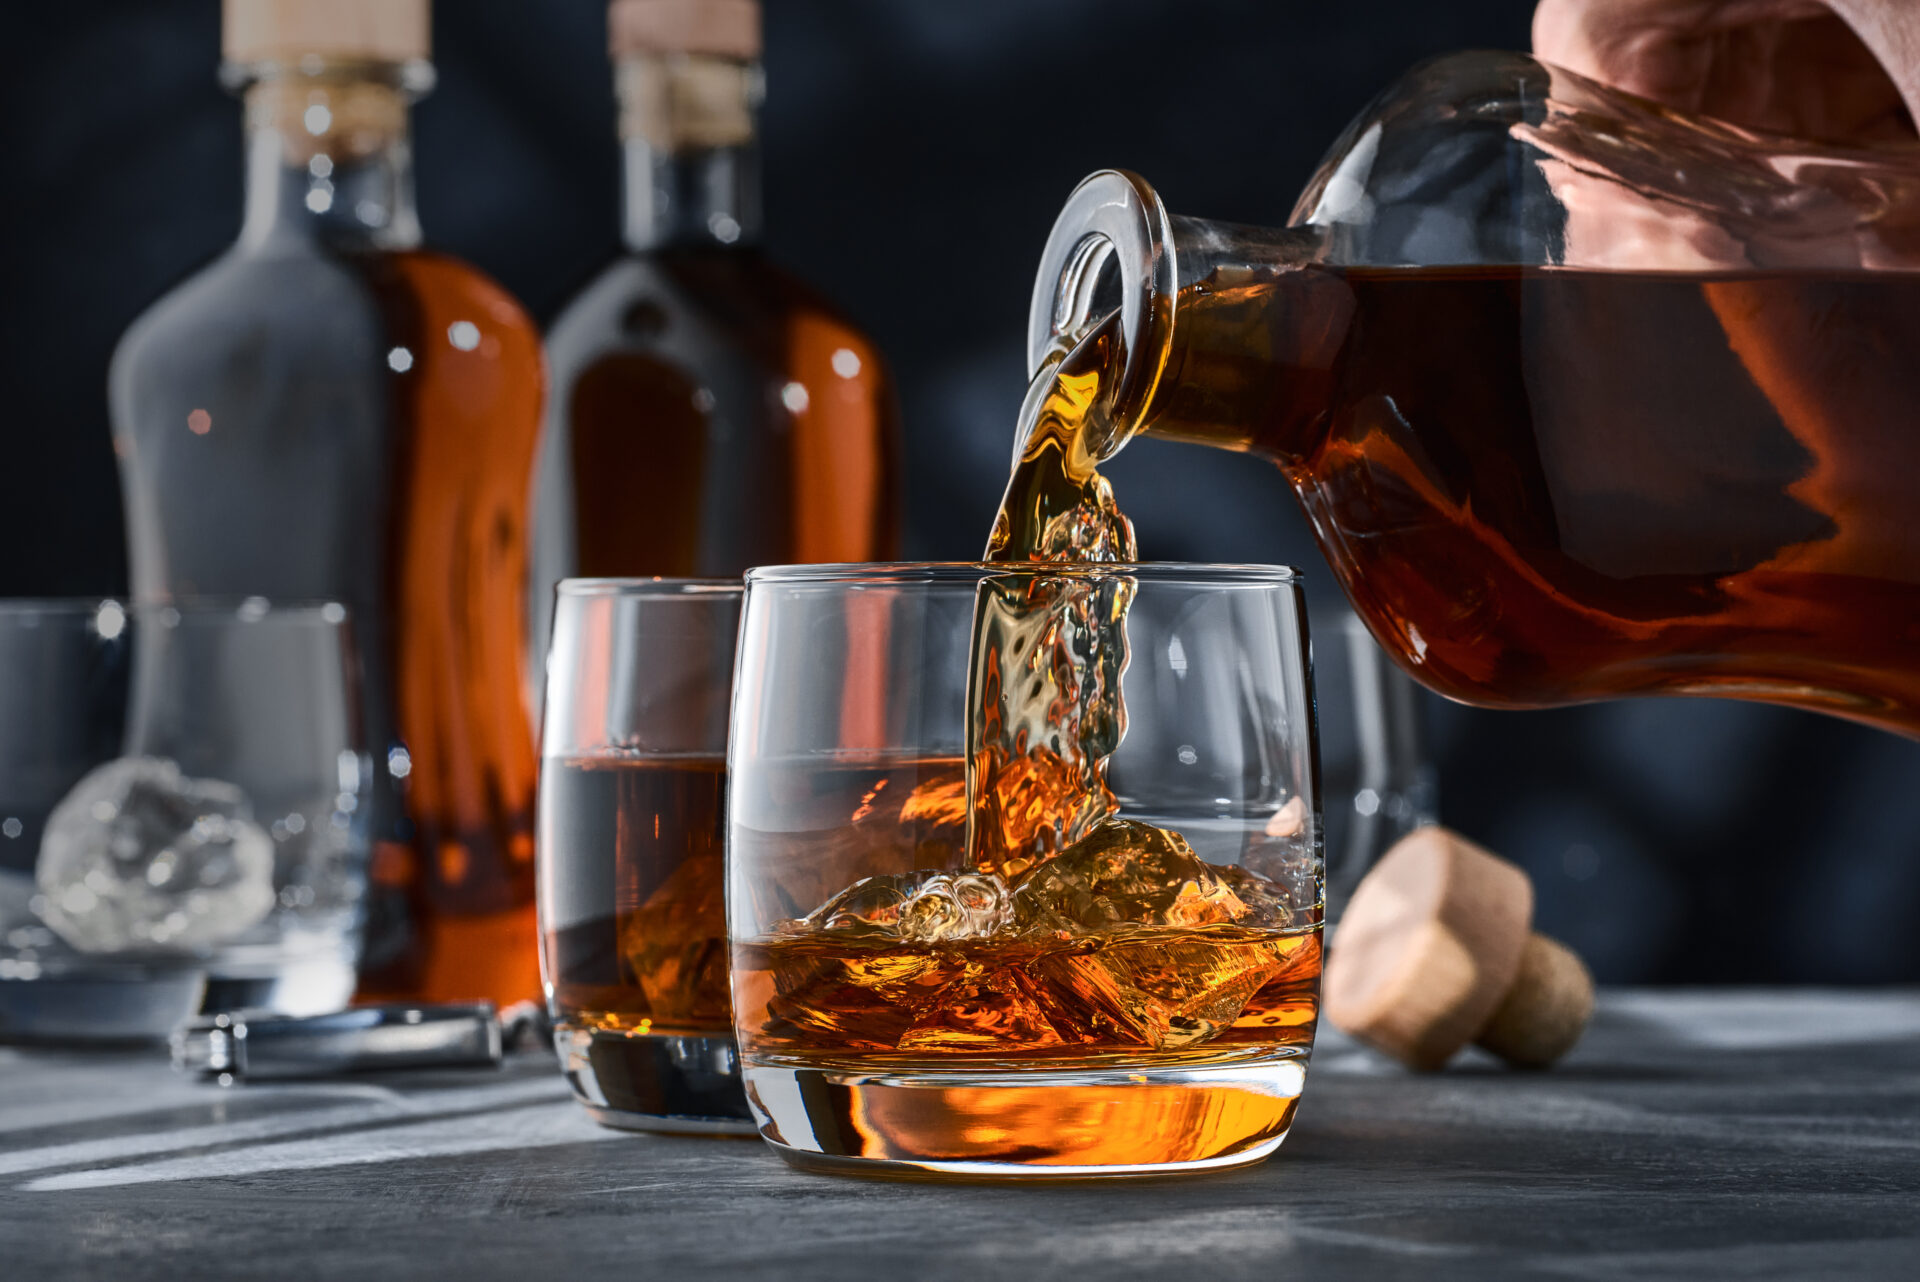 W.Va. Alcohol Commissioner Working To Increase High-End Bourbon Availability